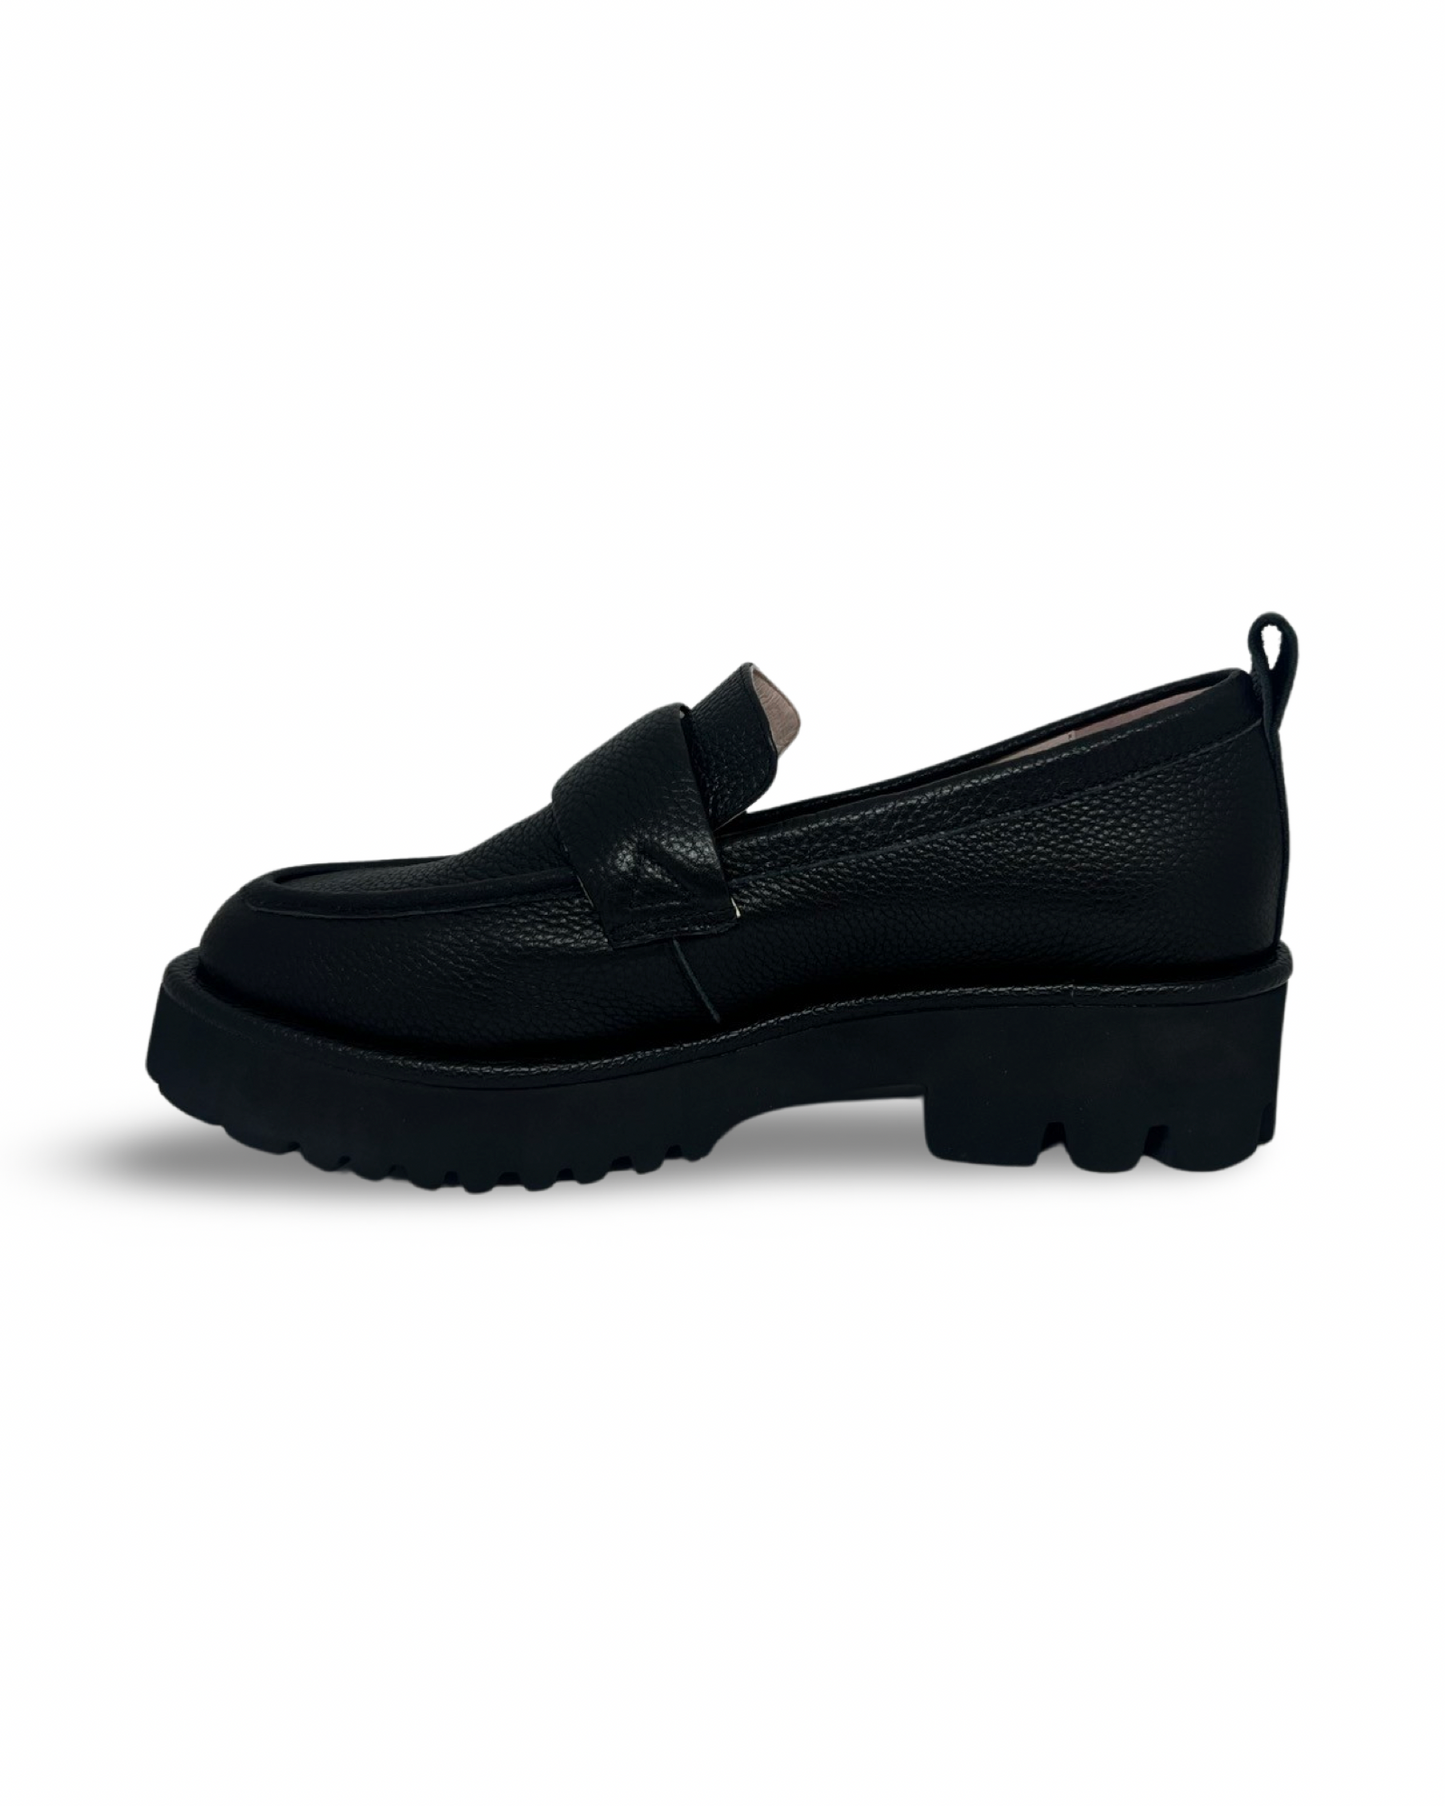 Hipster Loafer By Andrea Biani - Black